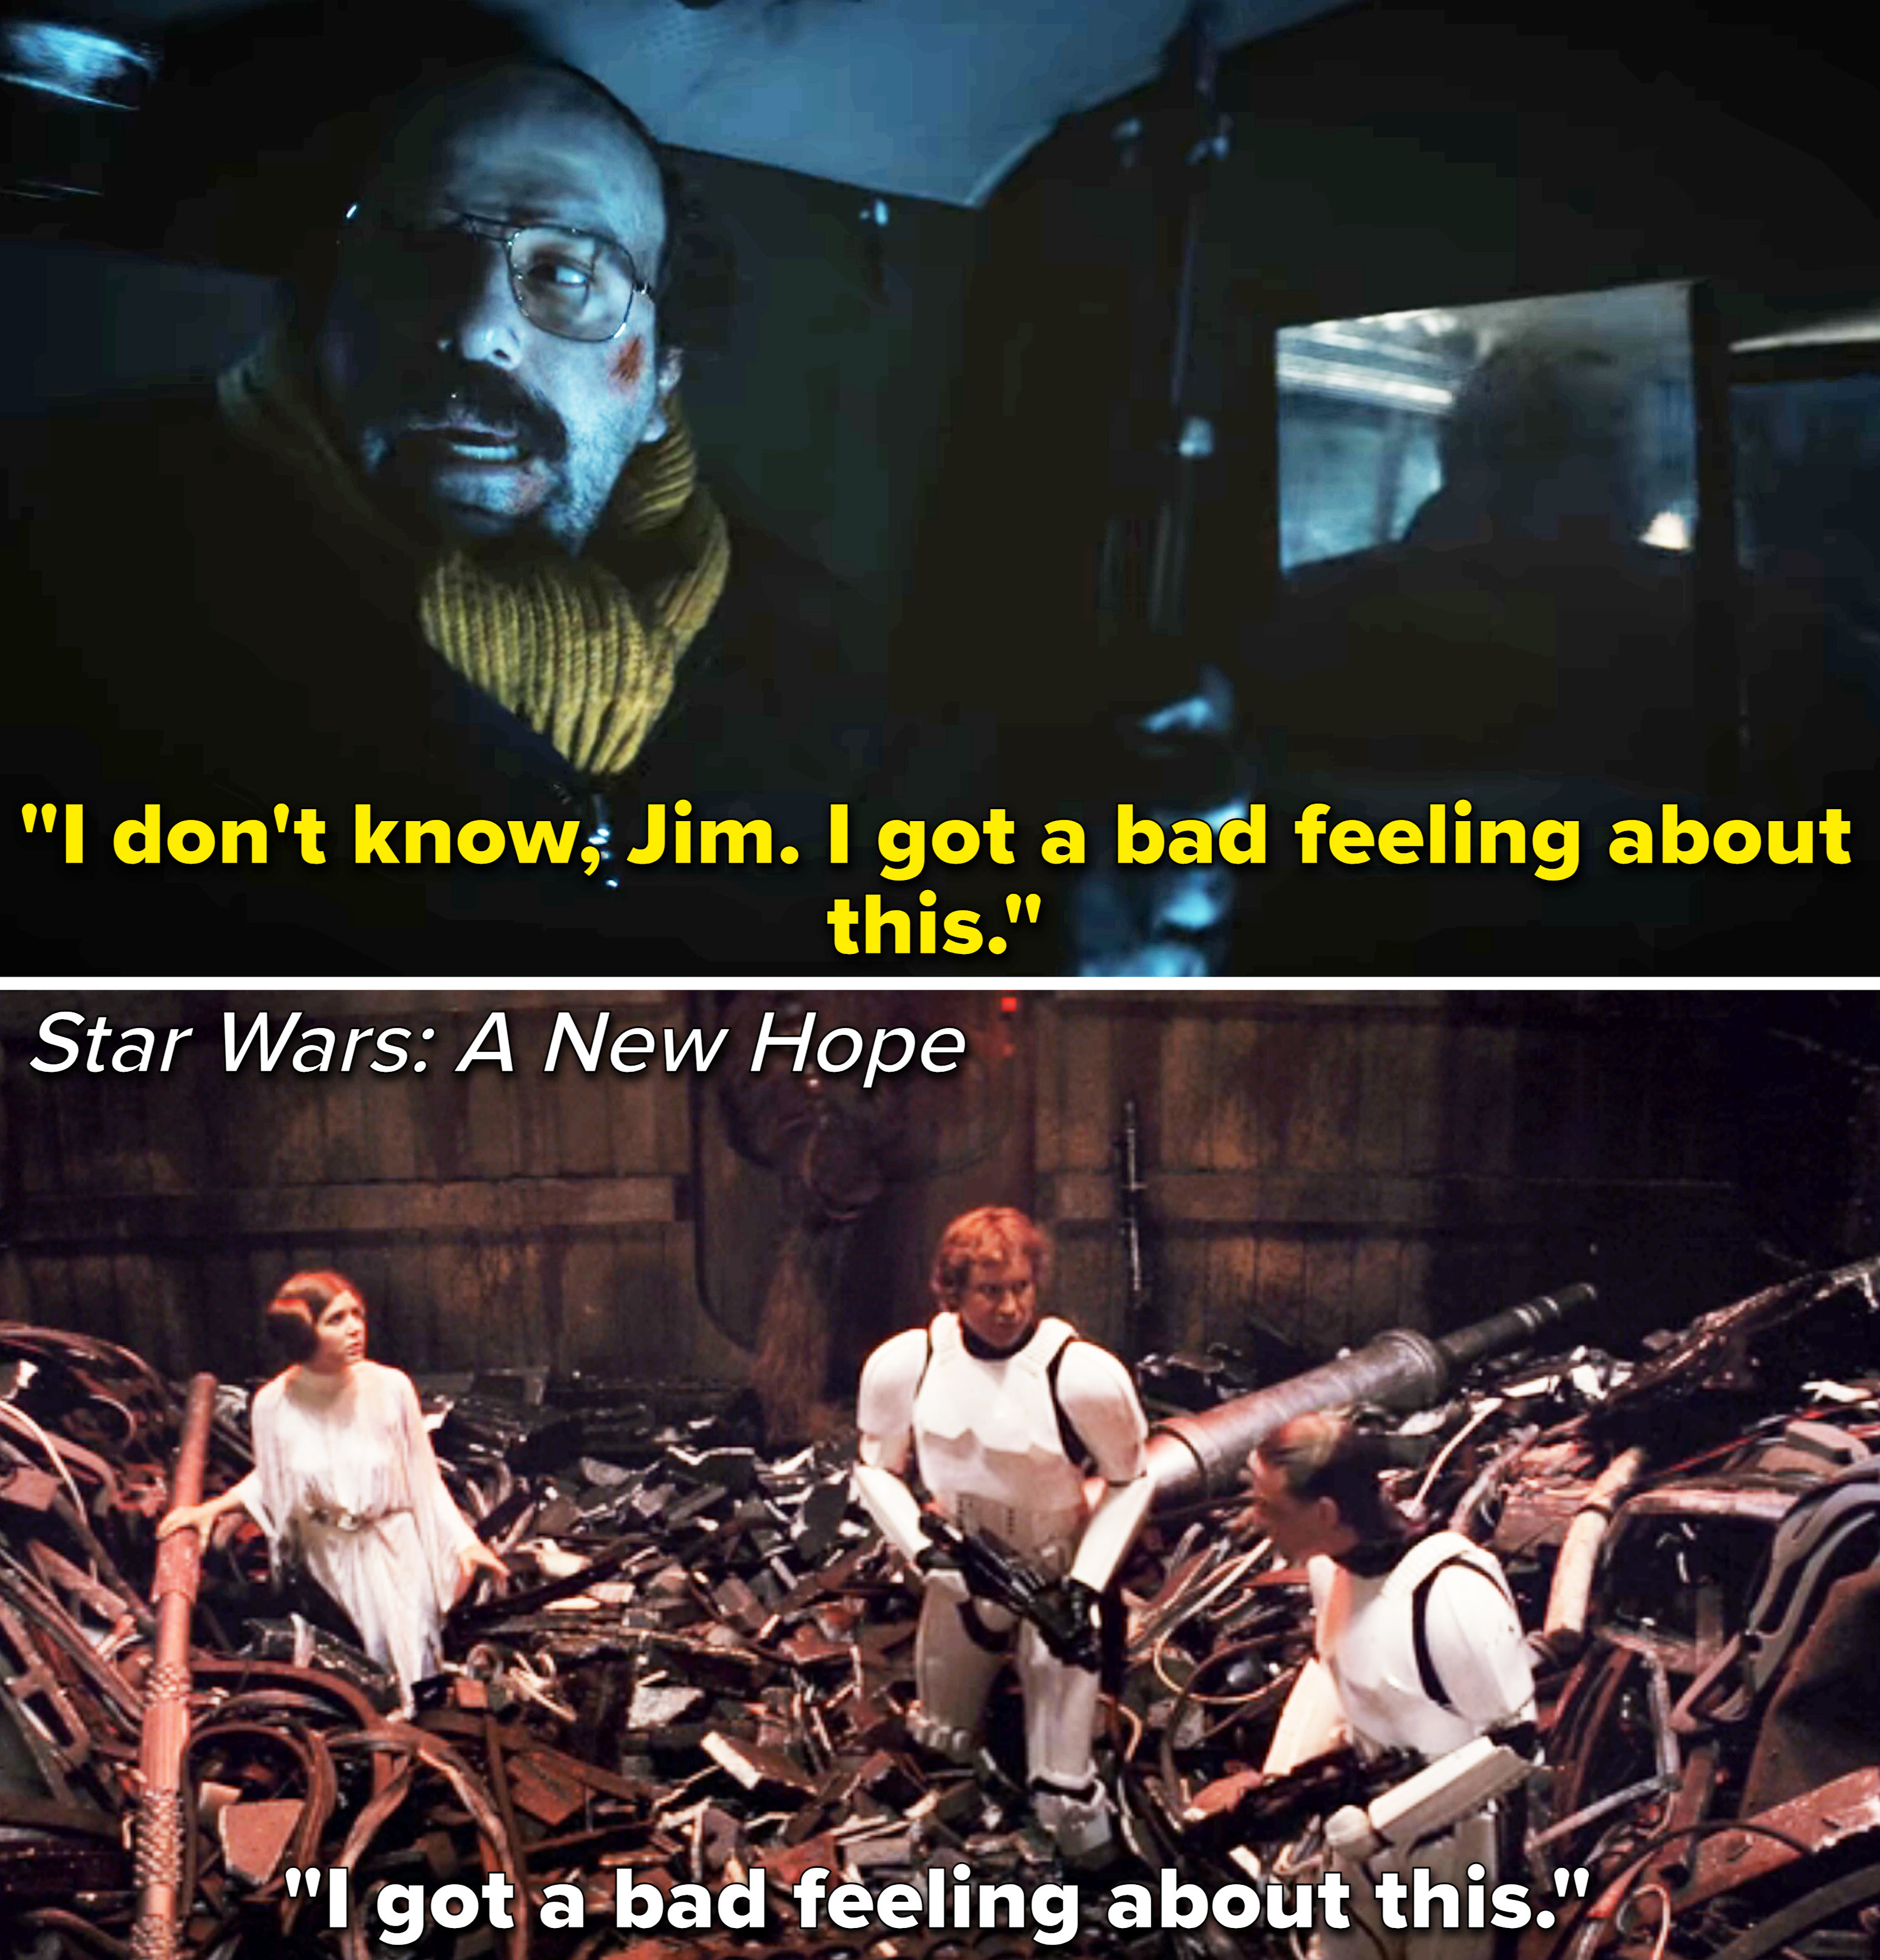 both scenes with actors saying, i got a bad feeling about this